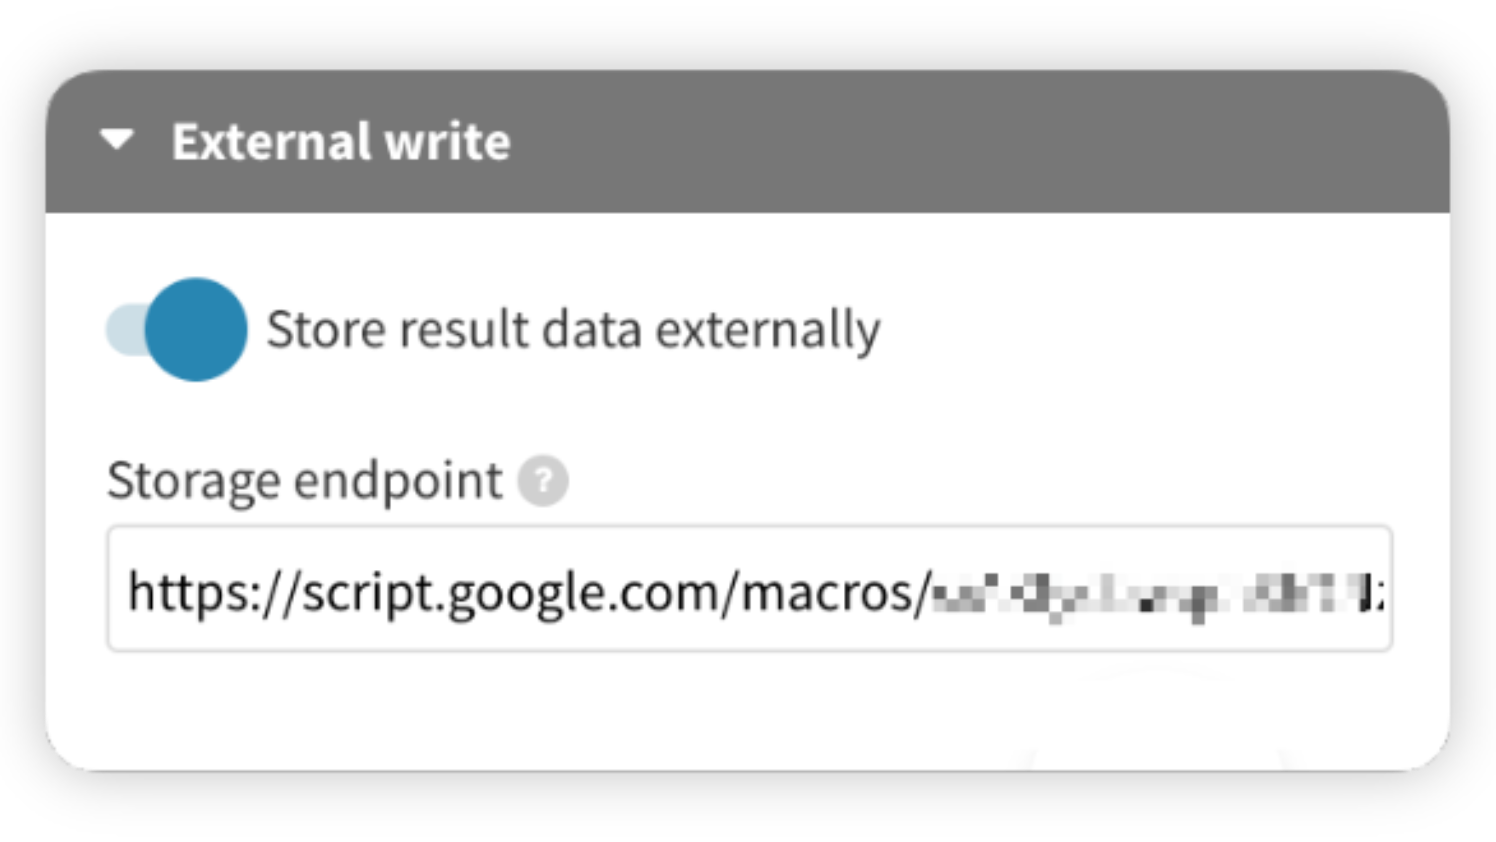 Using our new External write setting, you can automatically save user responses to a Google Sheet and other endpoints in real-time